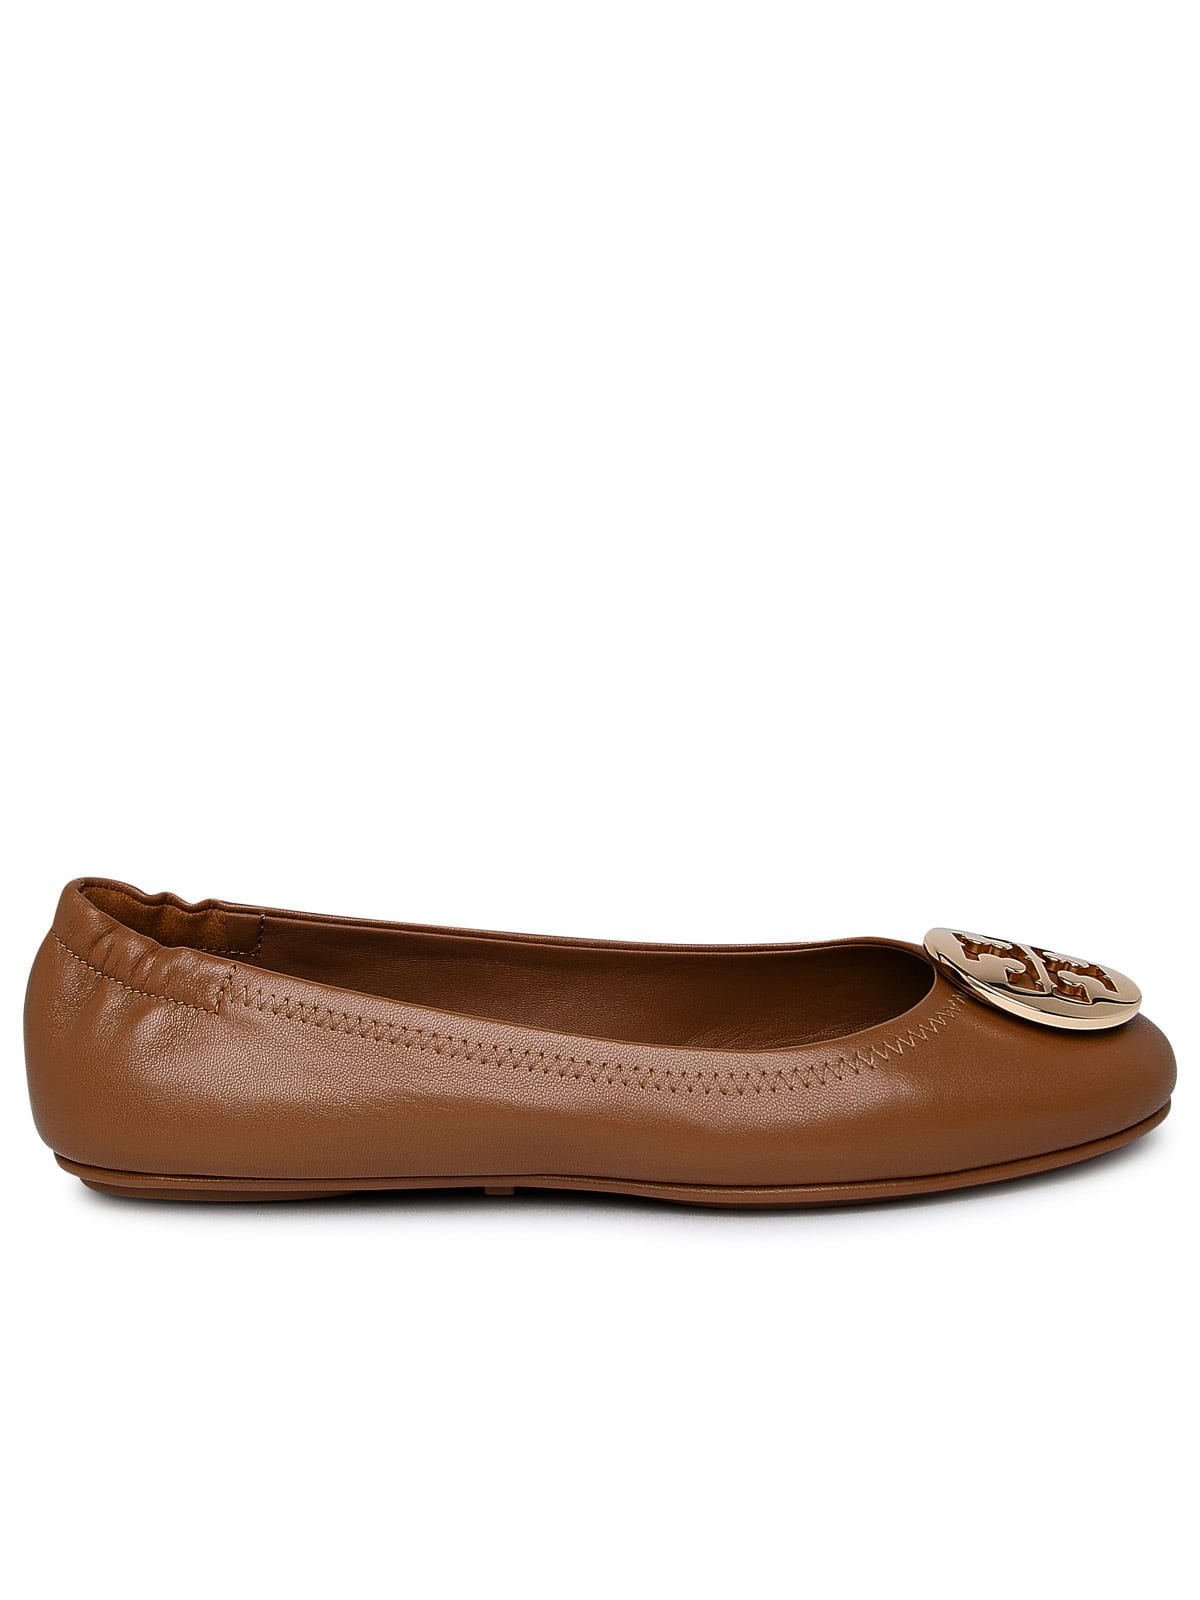 TORY BURCH BROWN LEATHER CLAIRE BALLET FLATS